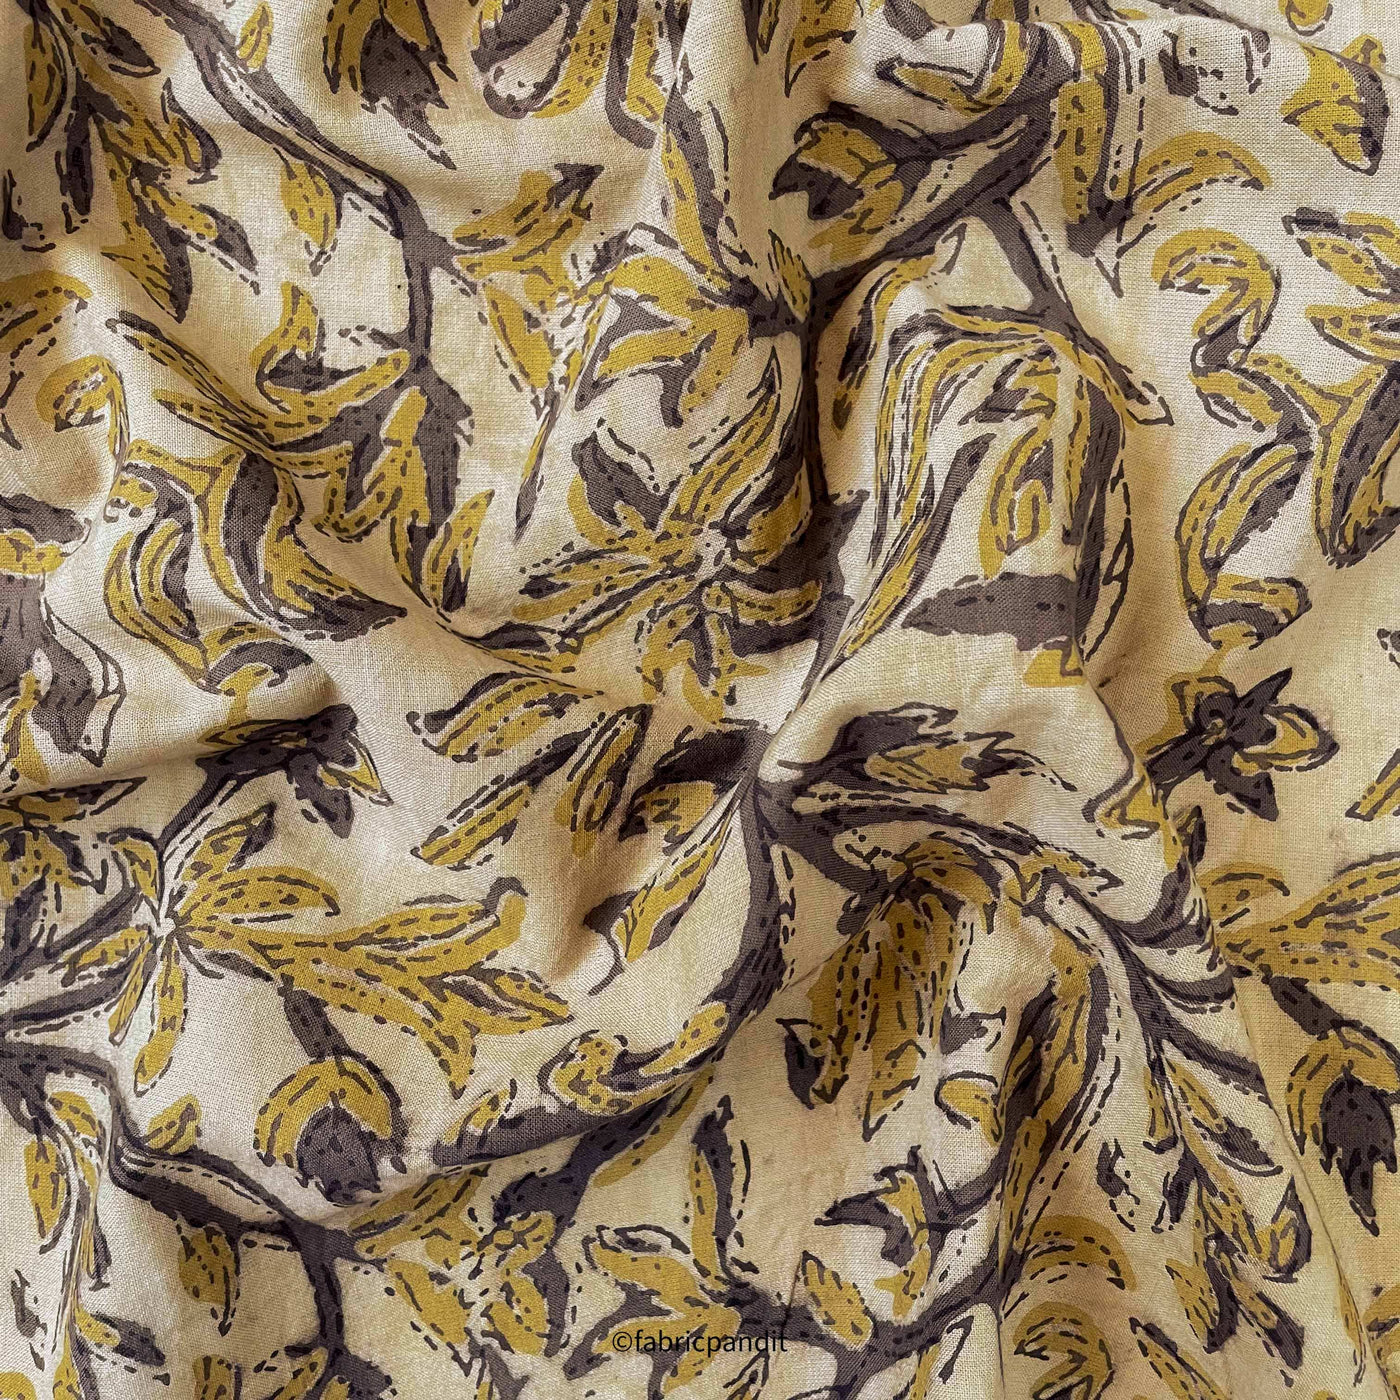 Fabric Pandit Fabric Dusty Beige & Yellow Wild Flower Garden Pure Ajrakh Natural Dyed Hand Block Printed Pure Cotton Fabric (Width 42 inches)